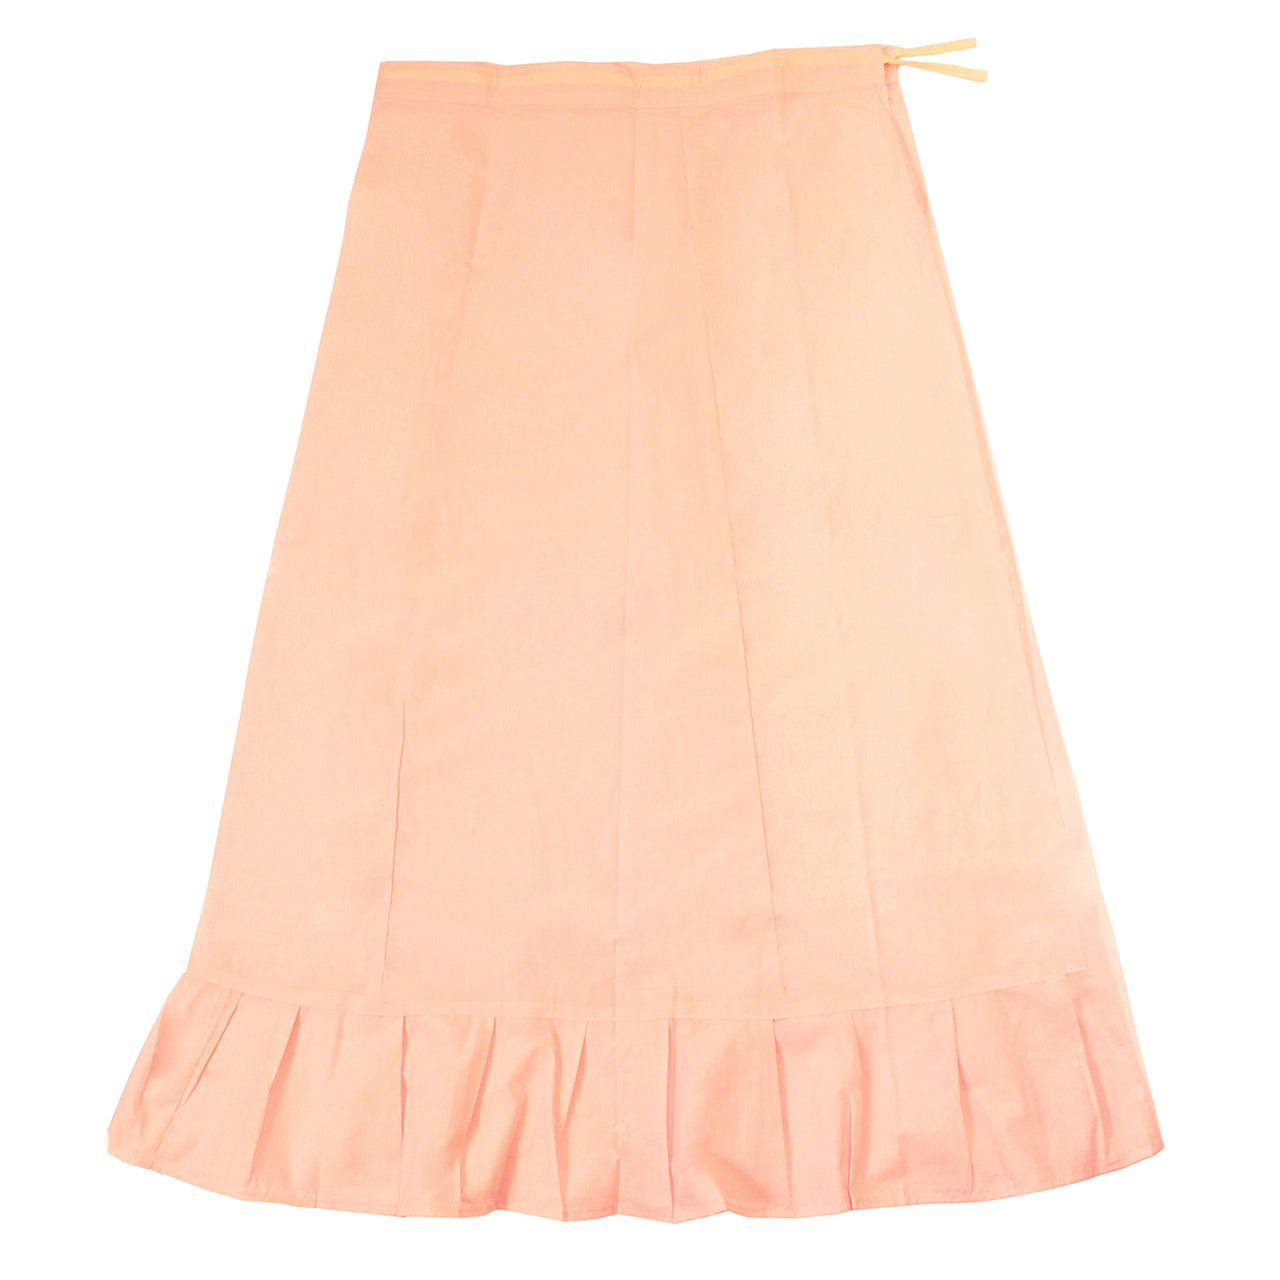 Baby Pink - Sari (Saree) Petticoat - Available in S, M, L & XL - Underskirts For Sari's